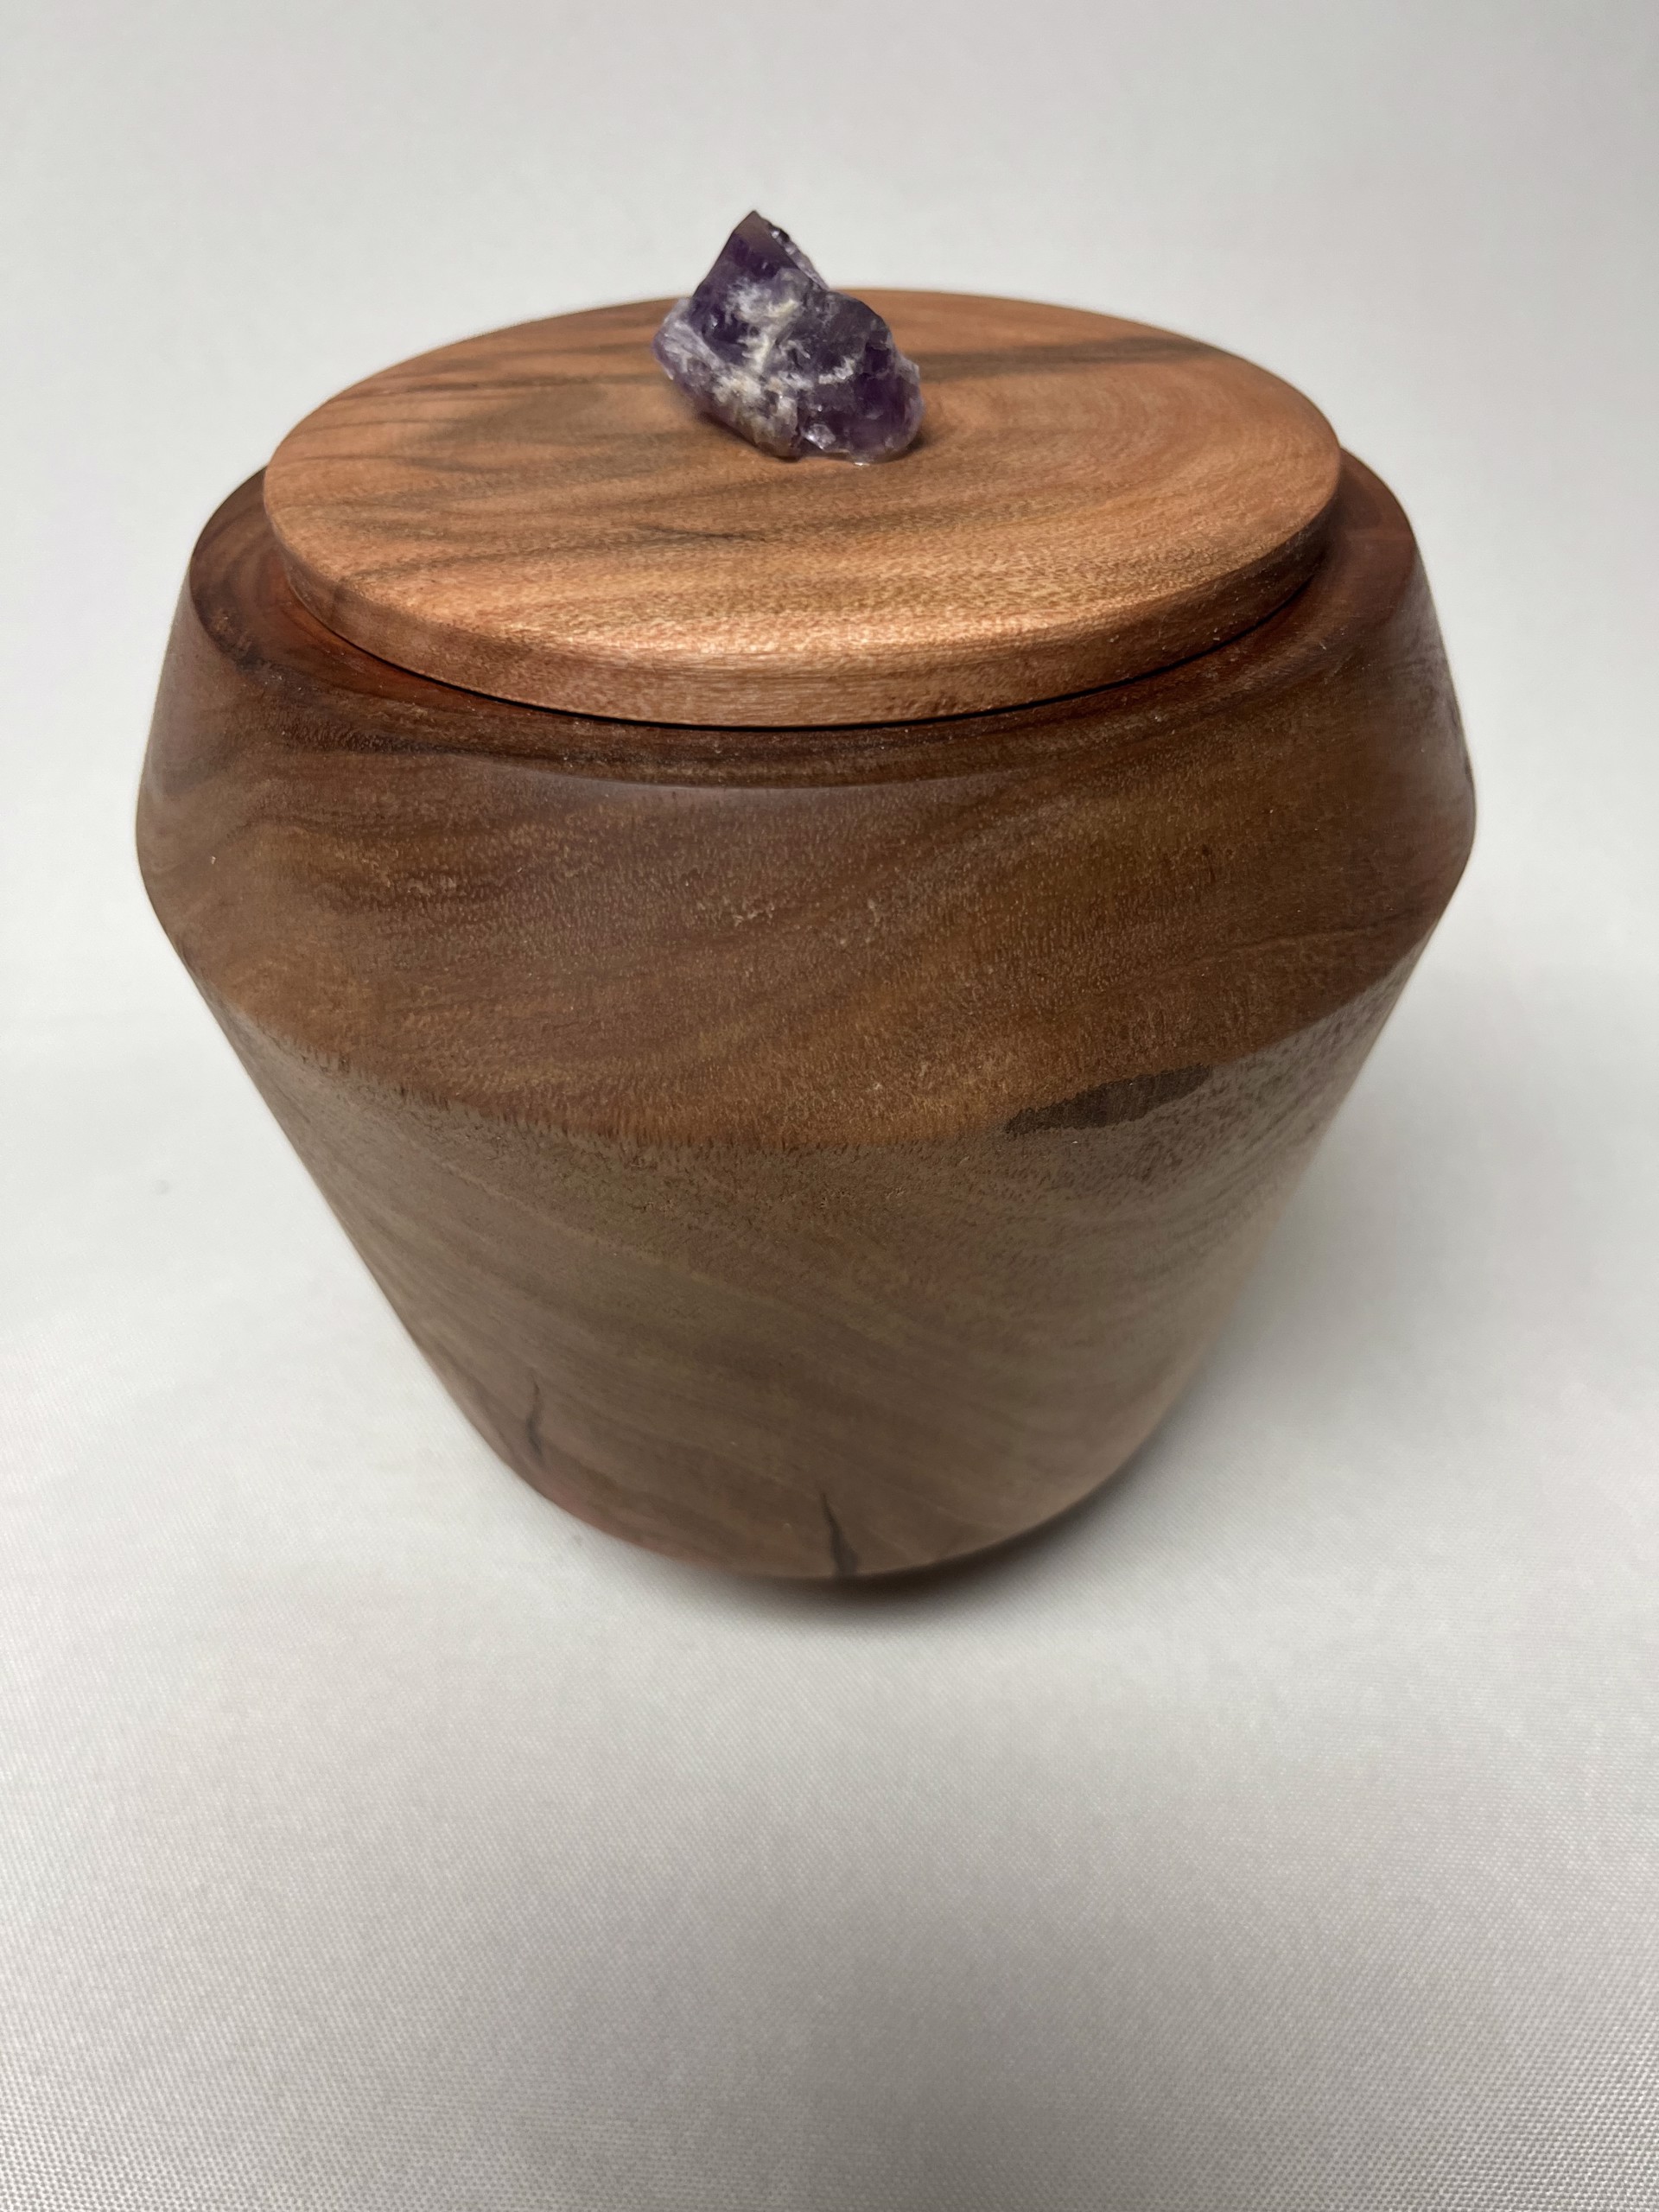 Turned Wood Jar W/Lid #23-34 by Rick Squires